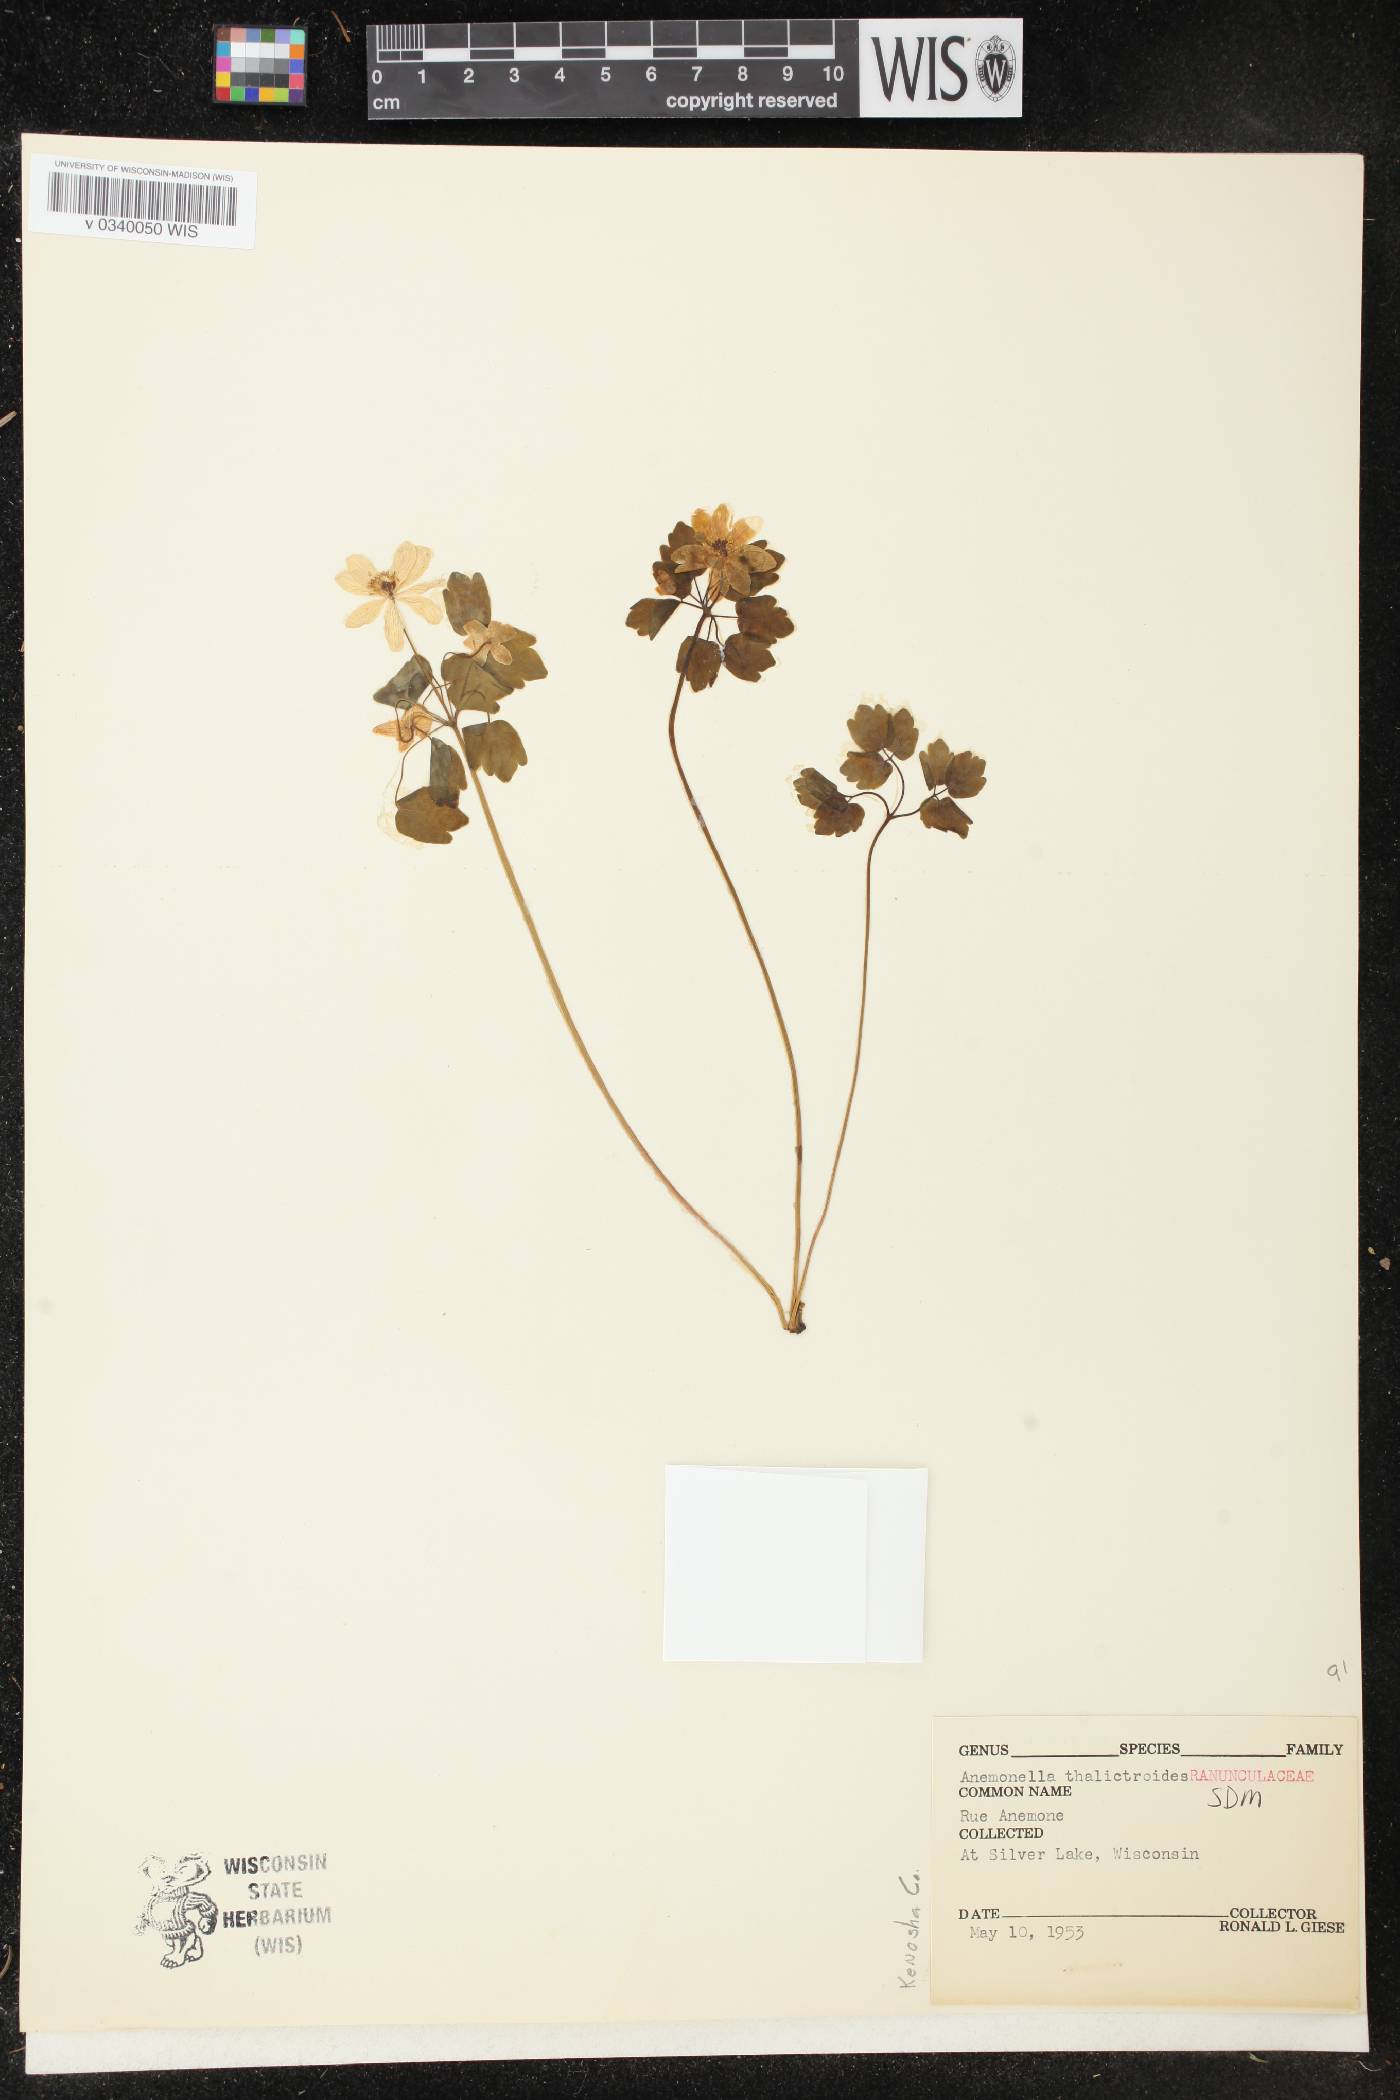 Rue-anemone specimen collected in Silver Lake, Wisconsin on May 10, 1953.